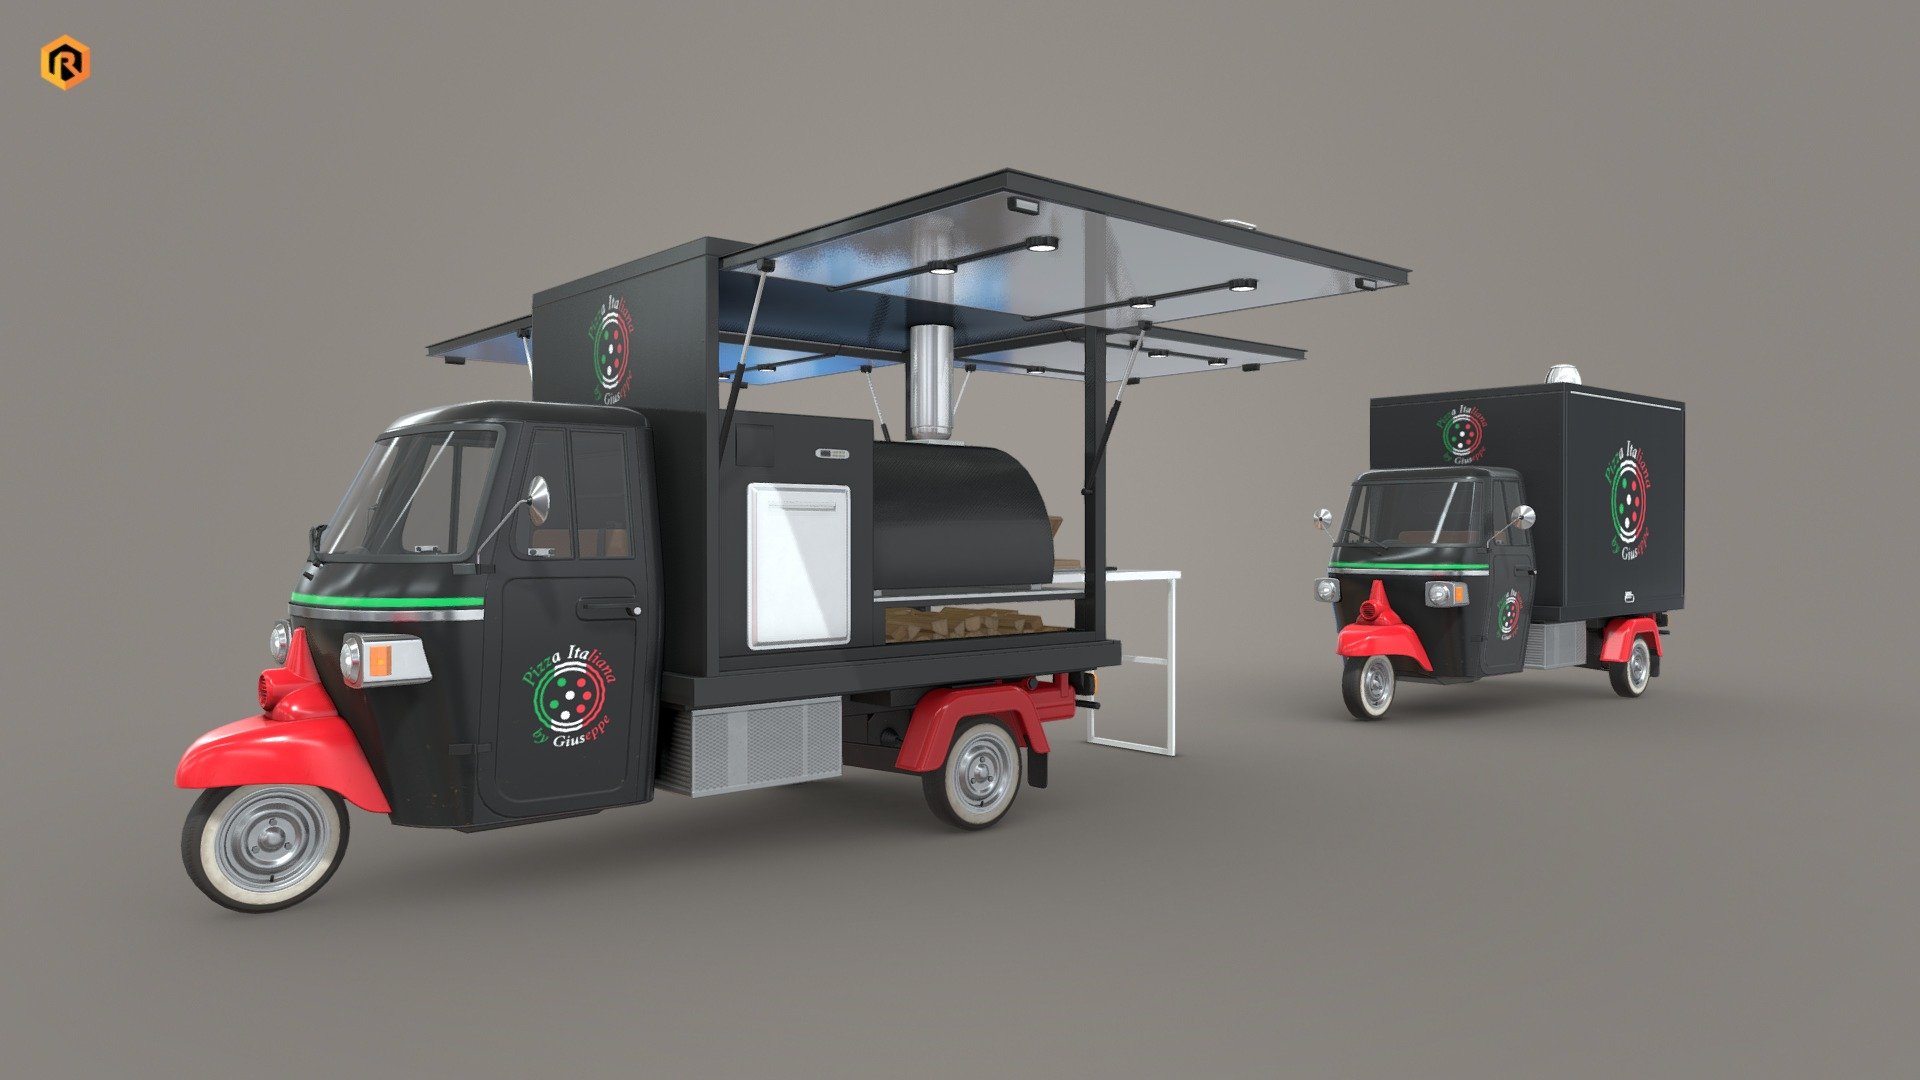 Low-poly PBR 3D model of Food Truck.  

There is open and closed trailer version of the model included. 

You can also get this model in a collection: https://skfb.ly/oJyQt

You can also visit my store page to find other themes of food carts.

This model is best for use in games and other VR/AR, real-time applications such as Unity or Unreal Engine. It can also be rendered in Blender (ex Cycles) or Vray.

Technical details:




6 PBR textures sets

 (Main Body, Alpha, Emission, Trailer Main, Trailer Alpha, Trailer Emission) 

29080 Triangles

The model is divided into few objects: main body, wheels, doors, steering wheel, two trailer types (open and close) etc. 

Lot of additional file formats included (Blender, Unity, Maya, etc.)  

More file formats are available in additional zip file on product page (See all files)

Please feel free to contact me if you have any questions or need any support for this asset.

Support e-mail: support@rescue3d.com - Food Truck - Buy Royalty Free 3D model by Rescue3D Assets (@rescue3d) 3d model